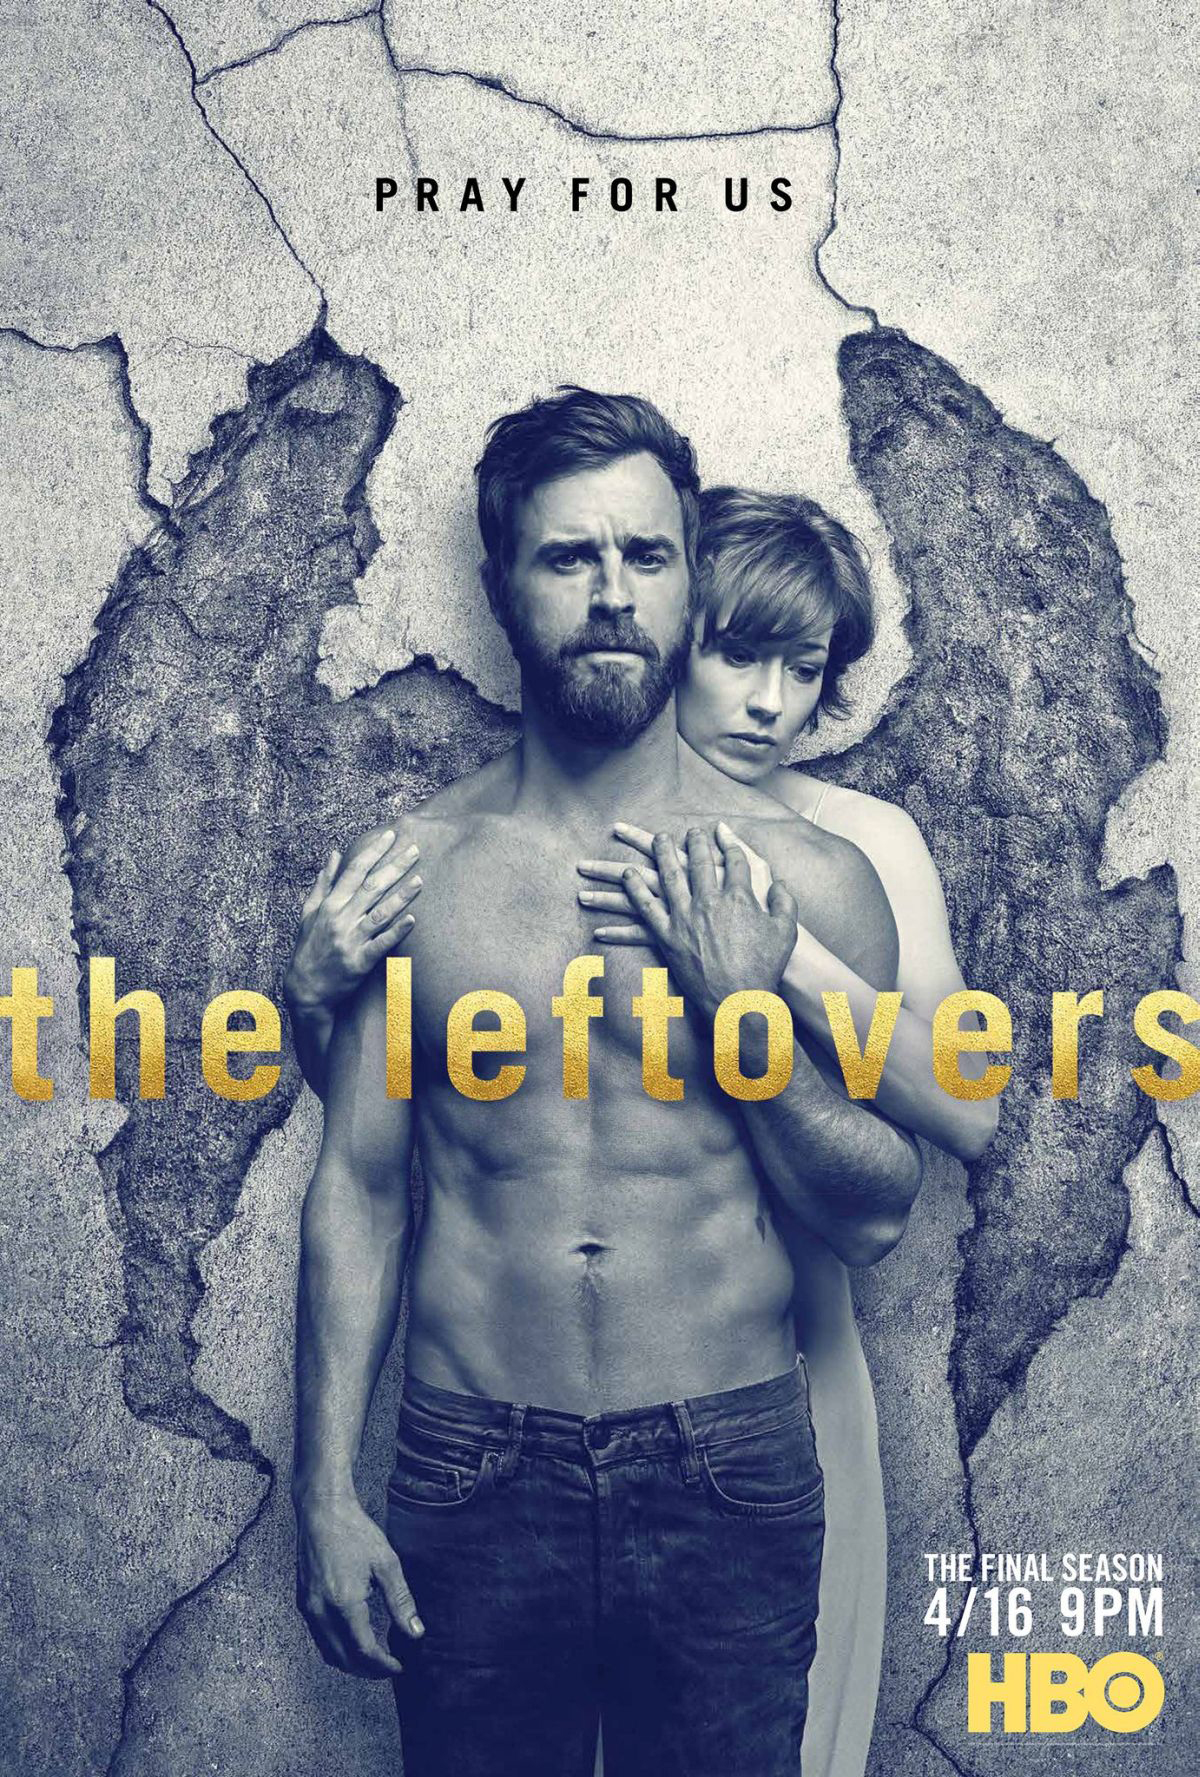 Theleftovers